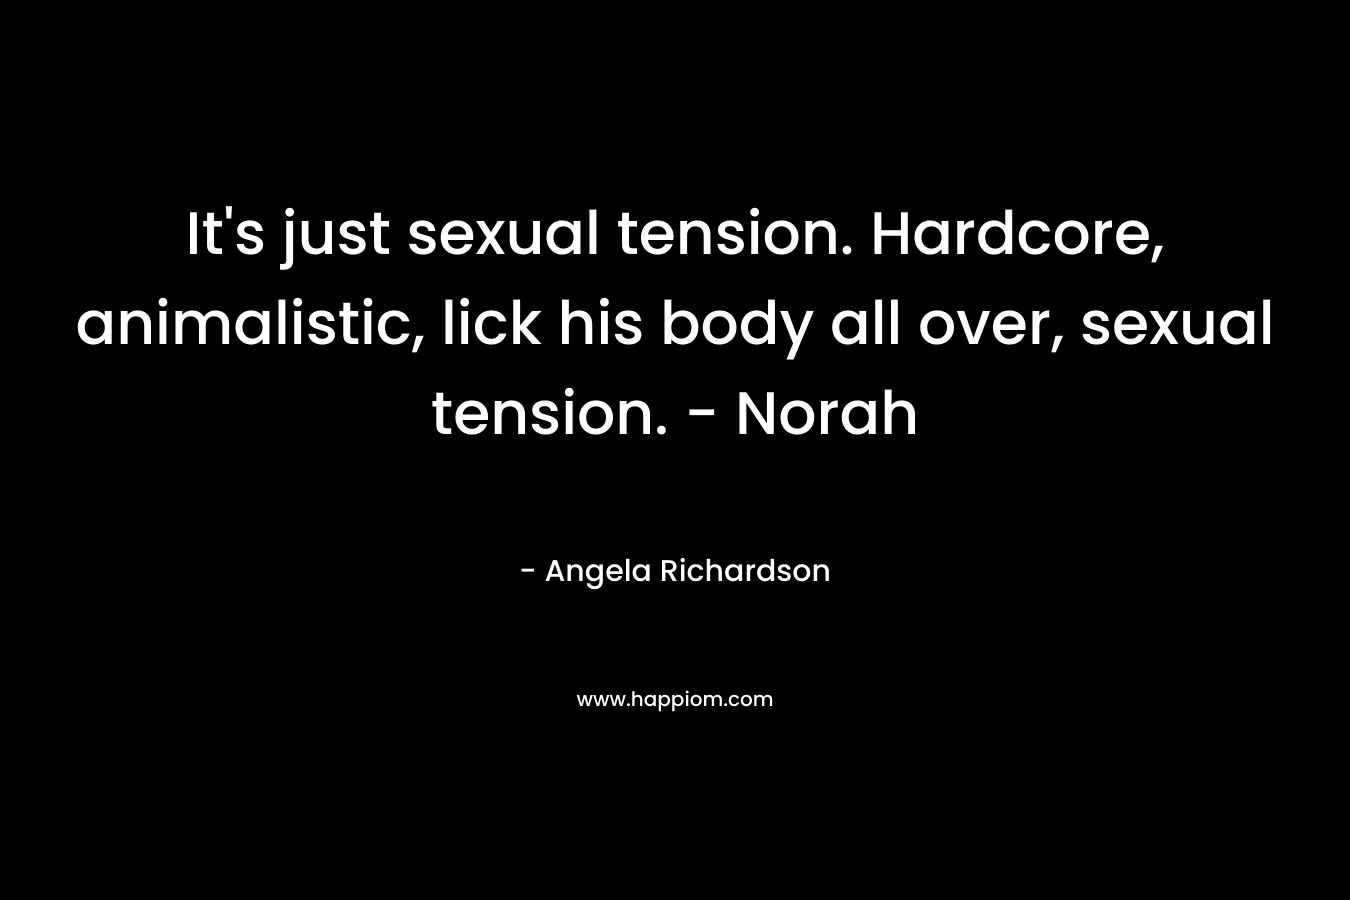 It's just sexual tension. Hardcore, animalistic, lick his body all over, sexual tension. - Norah